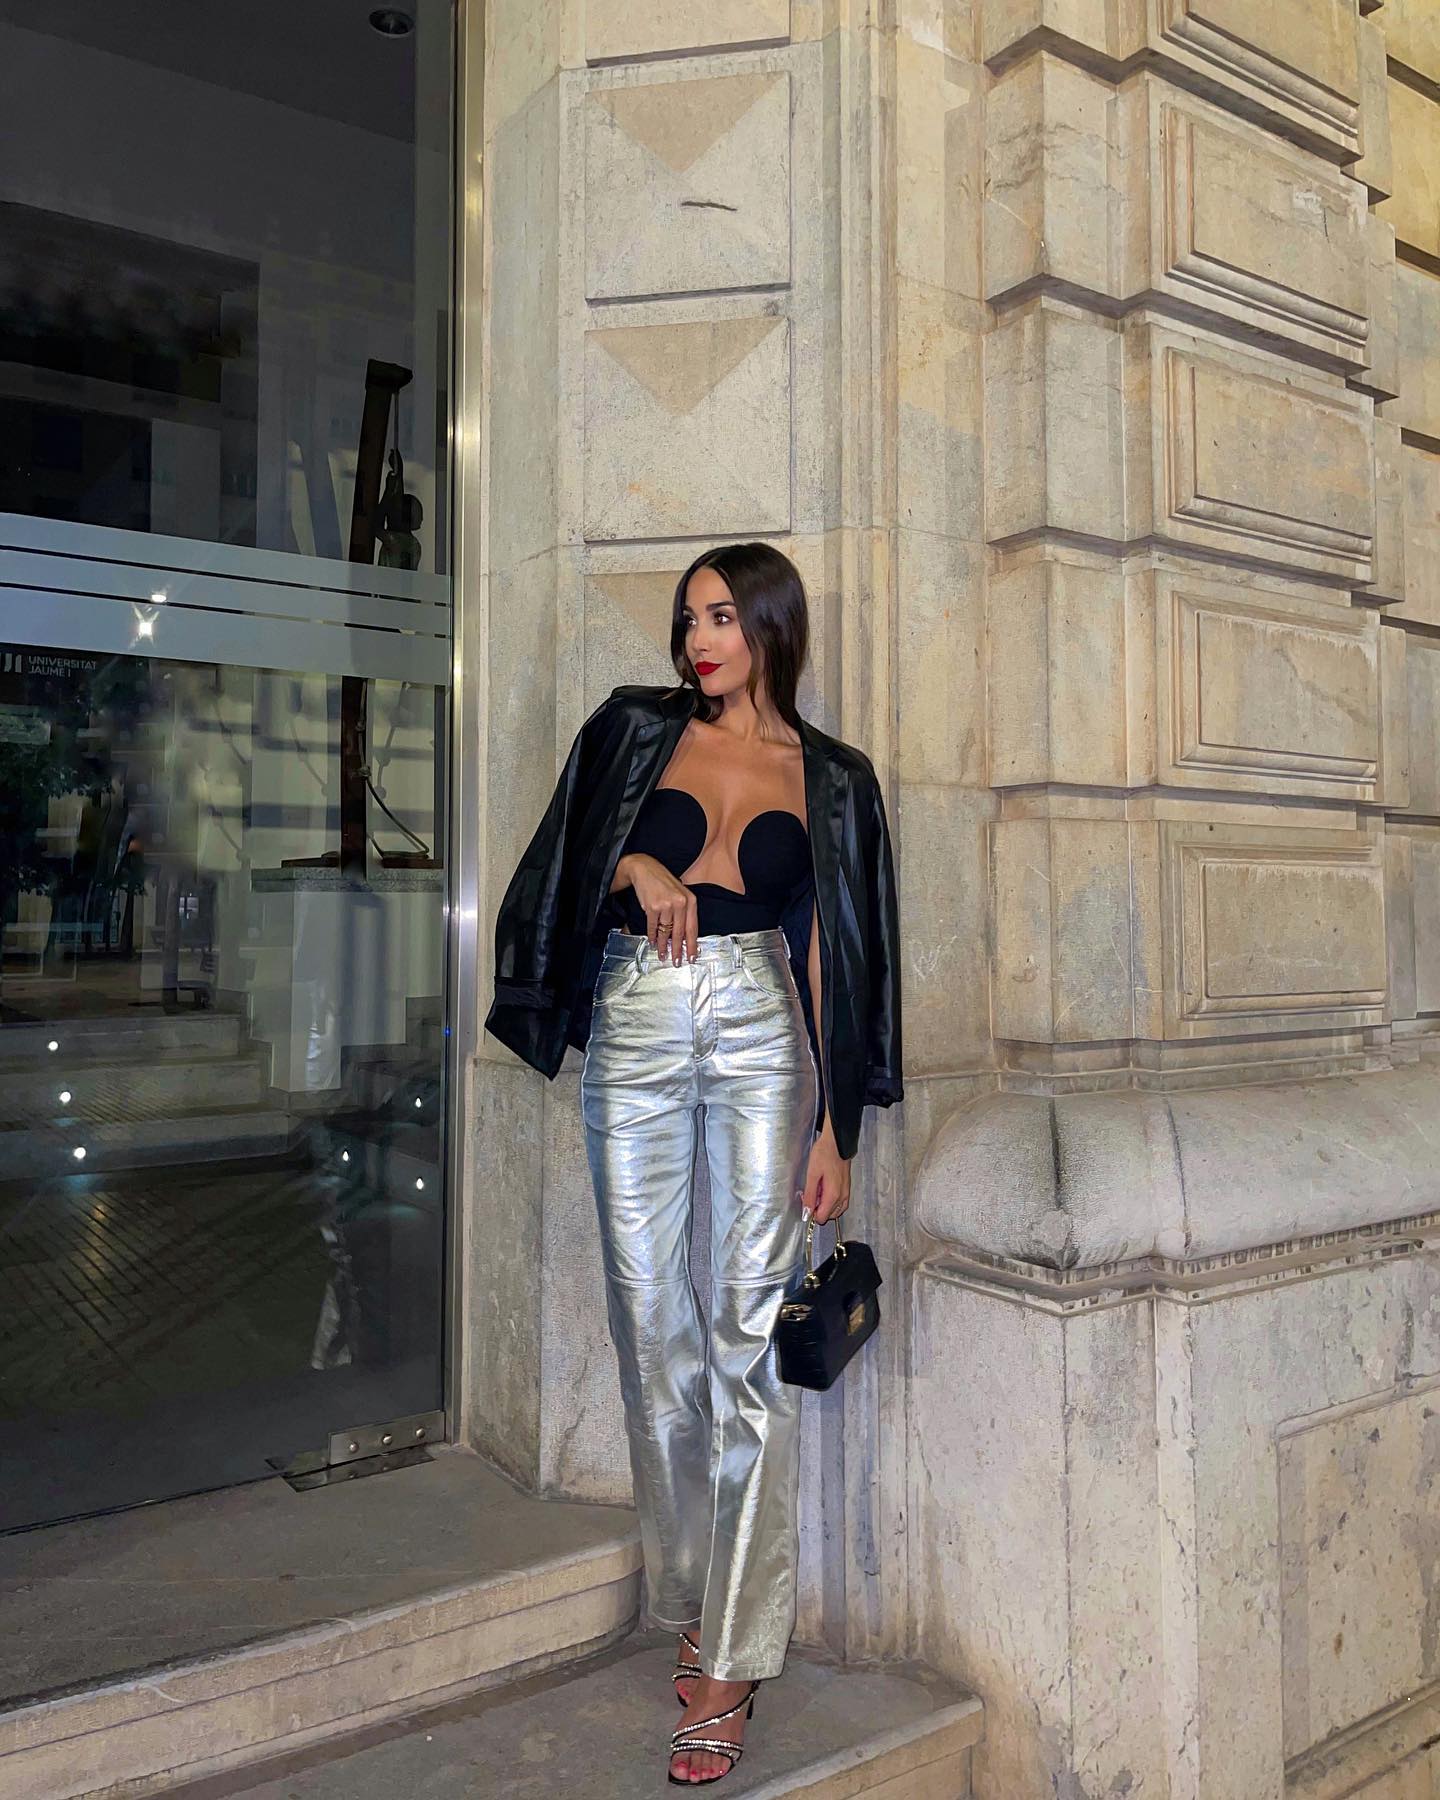 Liven Up Your Holiday Party Wardrobe With Metallic Pants - The Cool Hour |  Style Inspiration | Shop Fashion